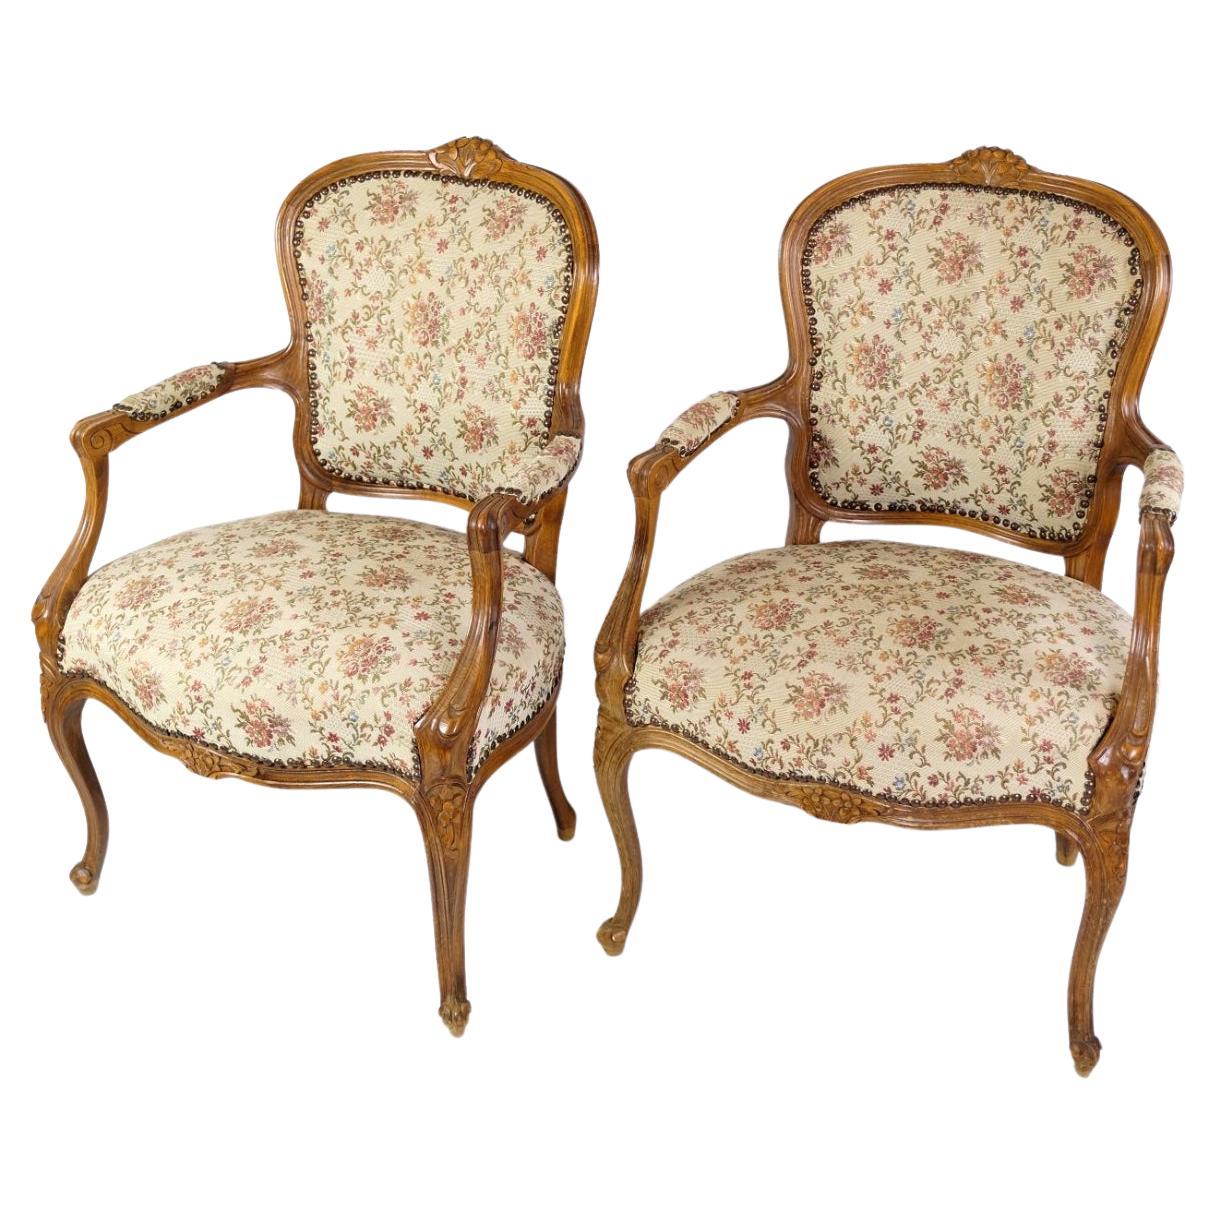 Pair of Neo-Rococo Armchairs Made In Light Wood With Decorated Fabric From 1930s